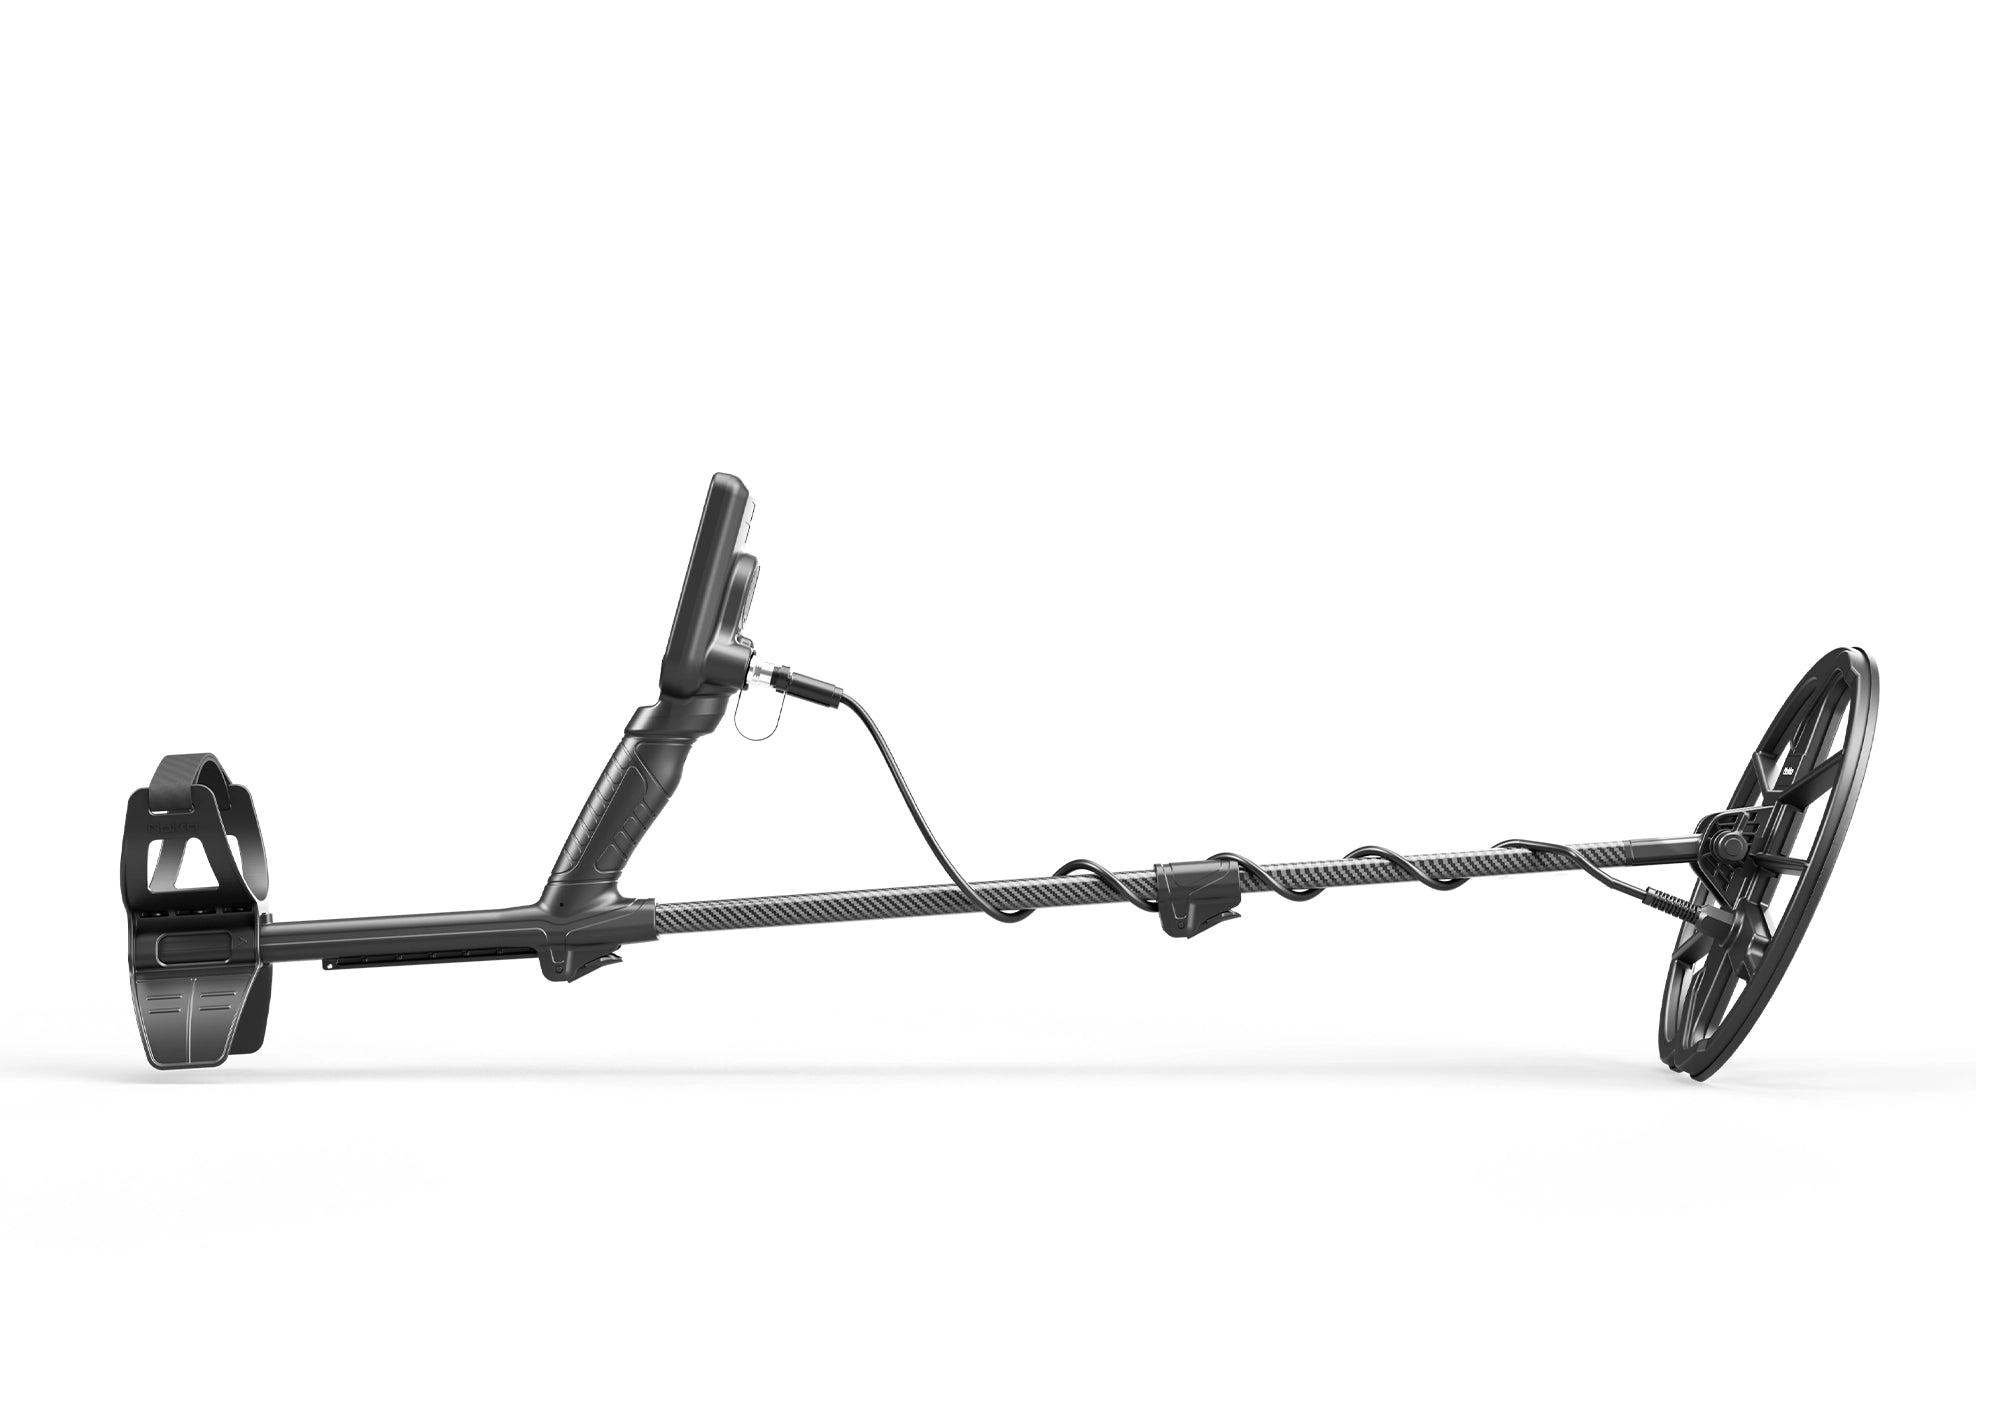 Nokta Simplex ULTRA Metal Detector, with Carbon Fiber Shafts and Bluetooth Wireless Headphone Compatible